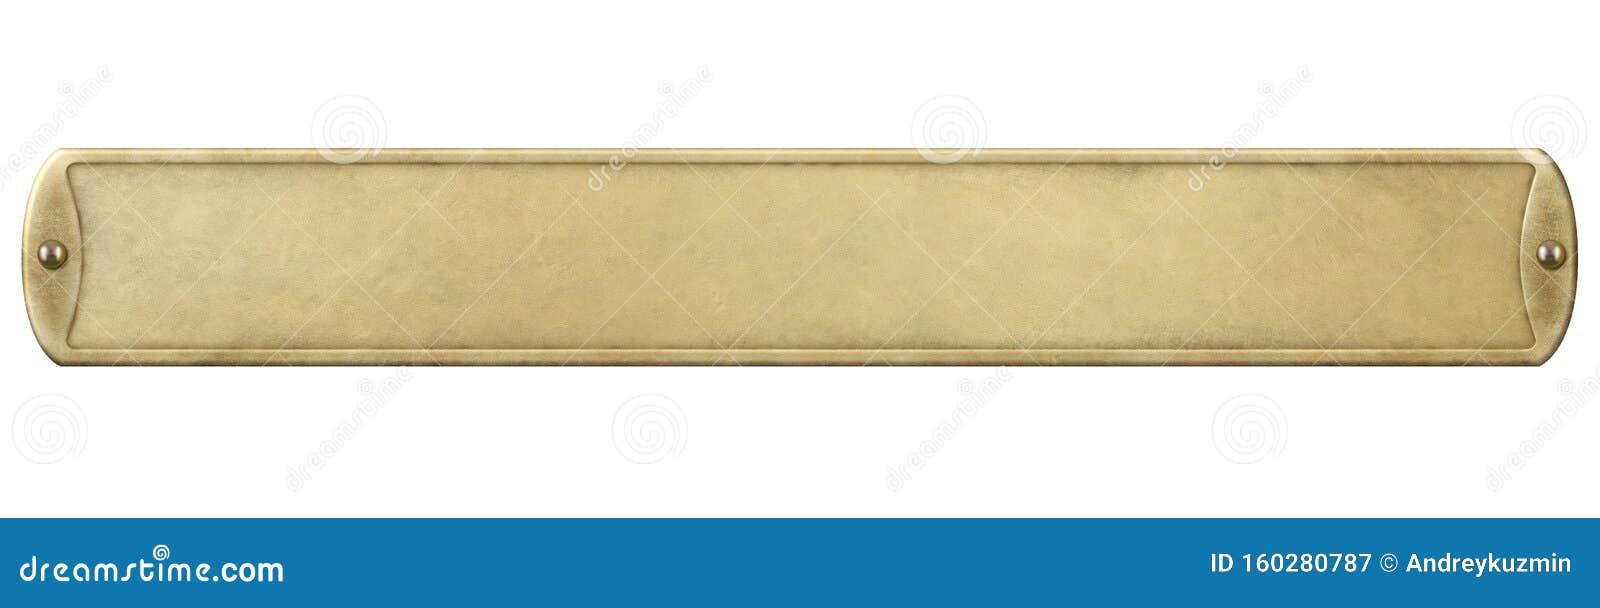 gold or brass old metal plate  with clipping path included